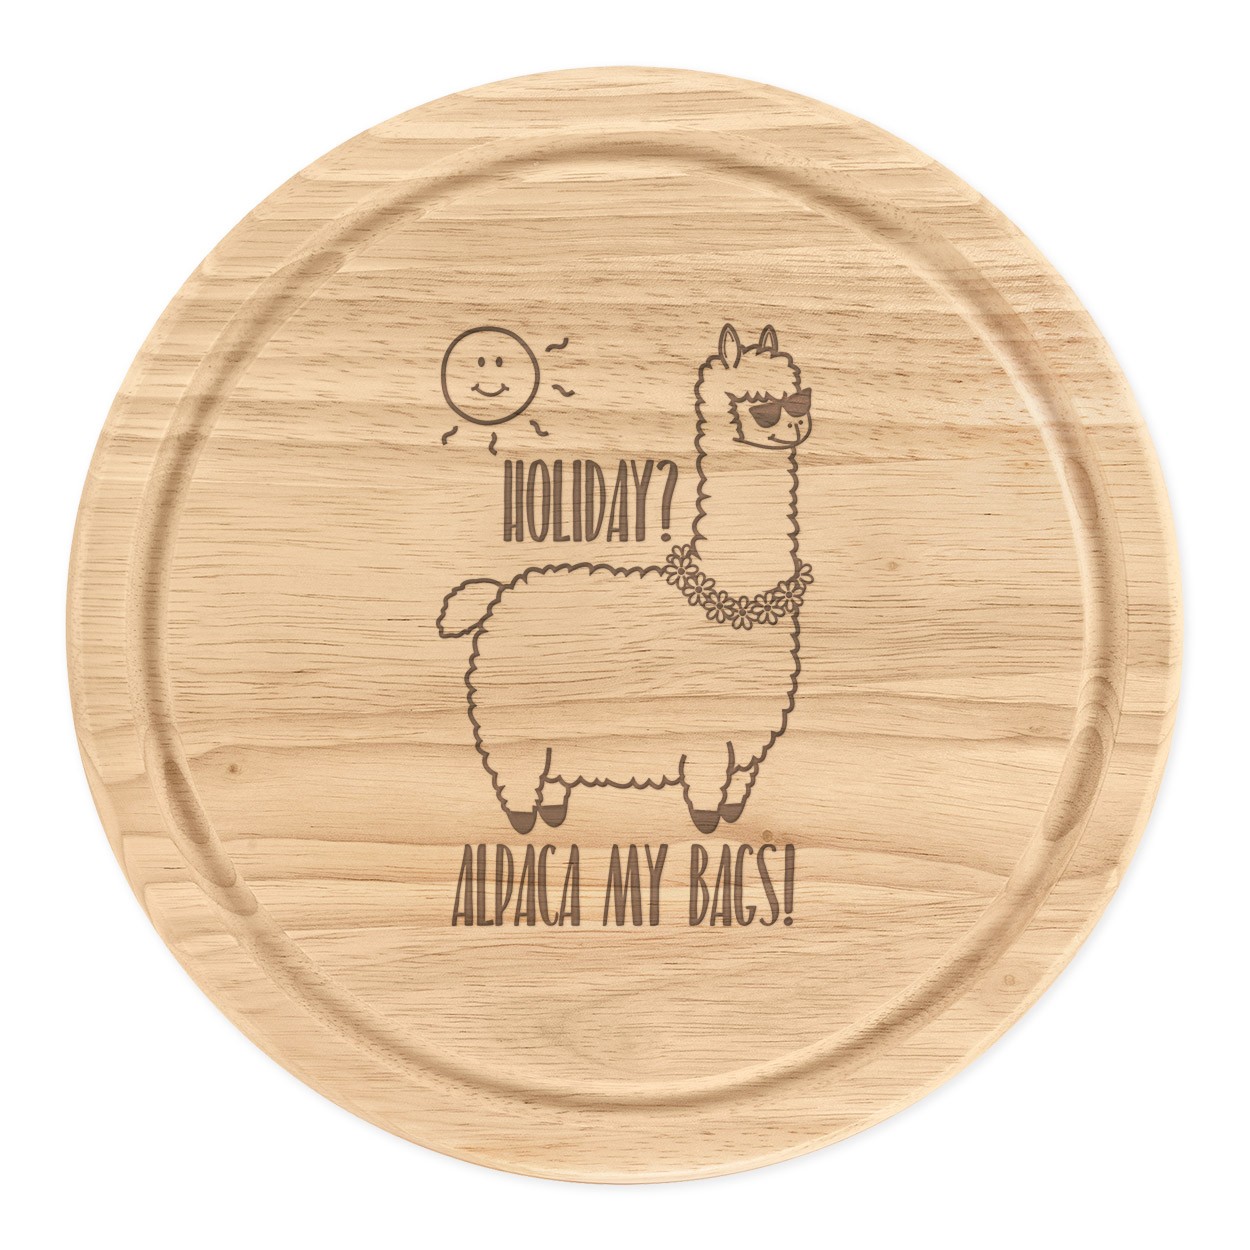 Holiday Alpaca My Bags Wooden Chopping Cheese Board Round 25cm